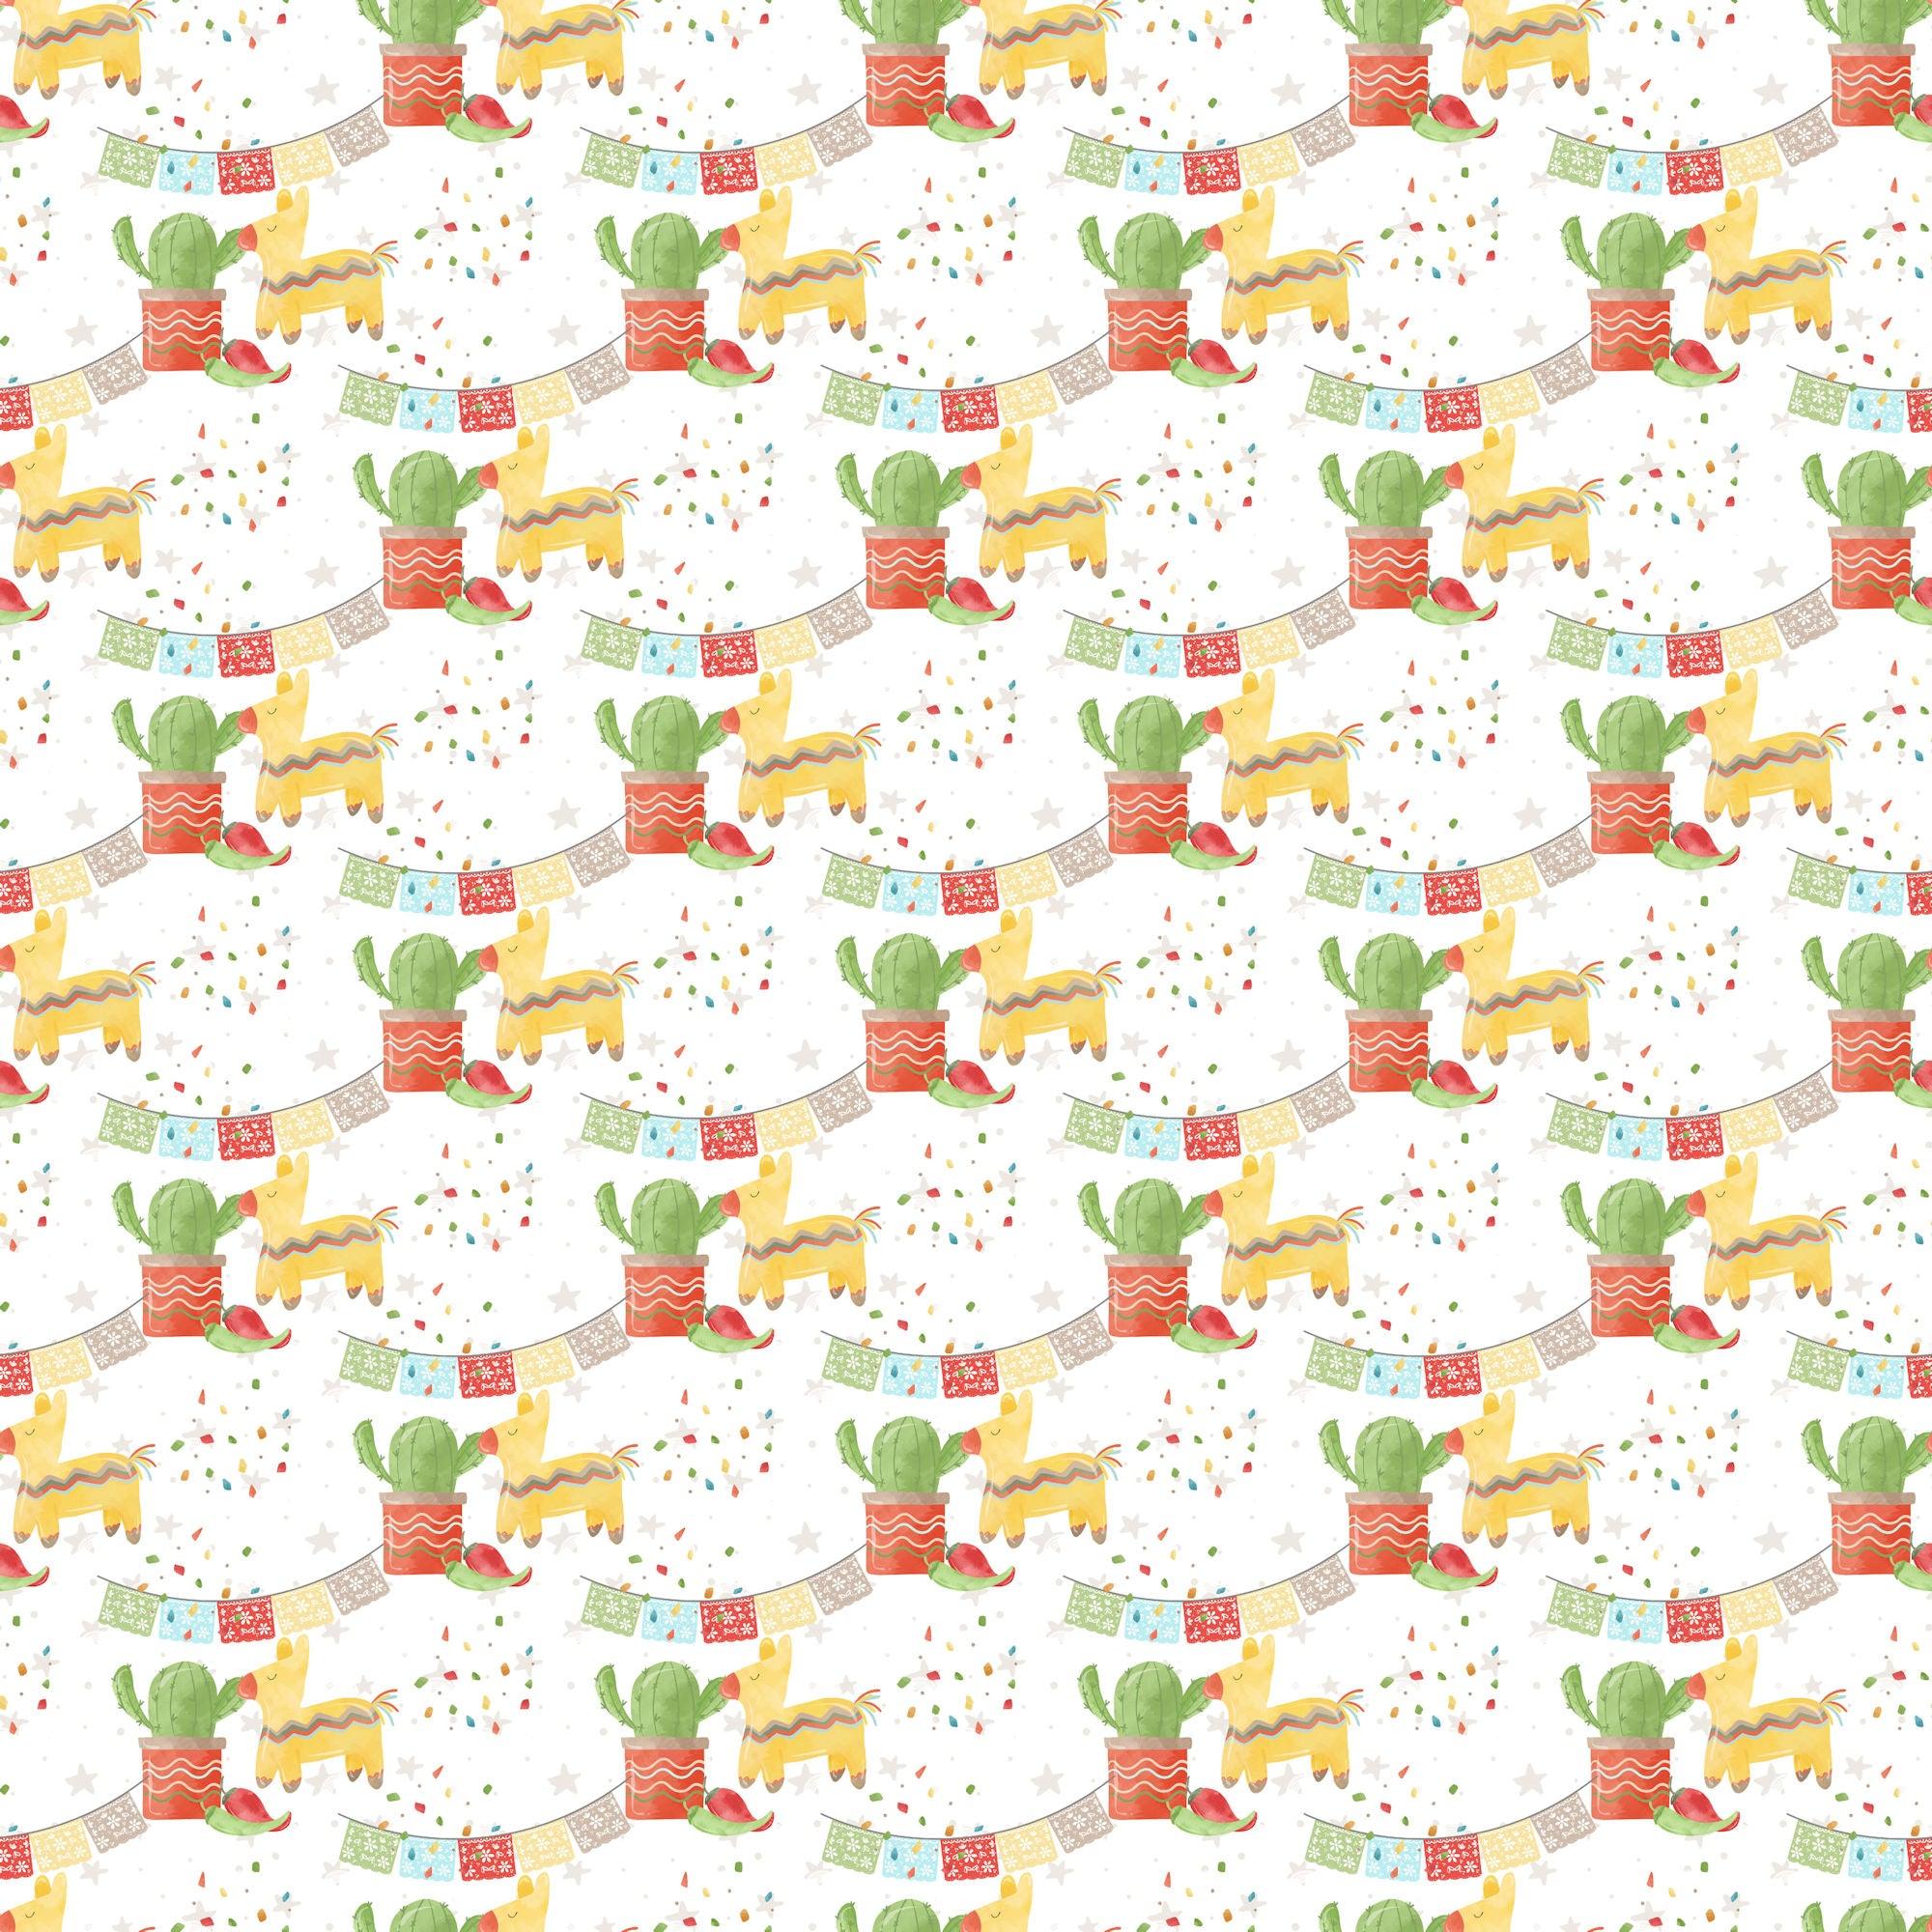 Fiesta Collection Cactus 12 x 12 Double-Sided Scrapbook Paper by SSC Designs - Scrapbook Supply Companies